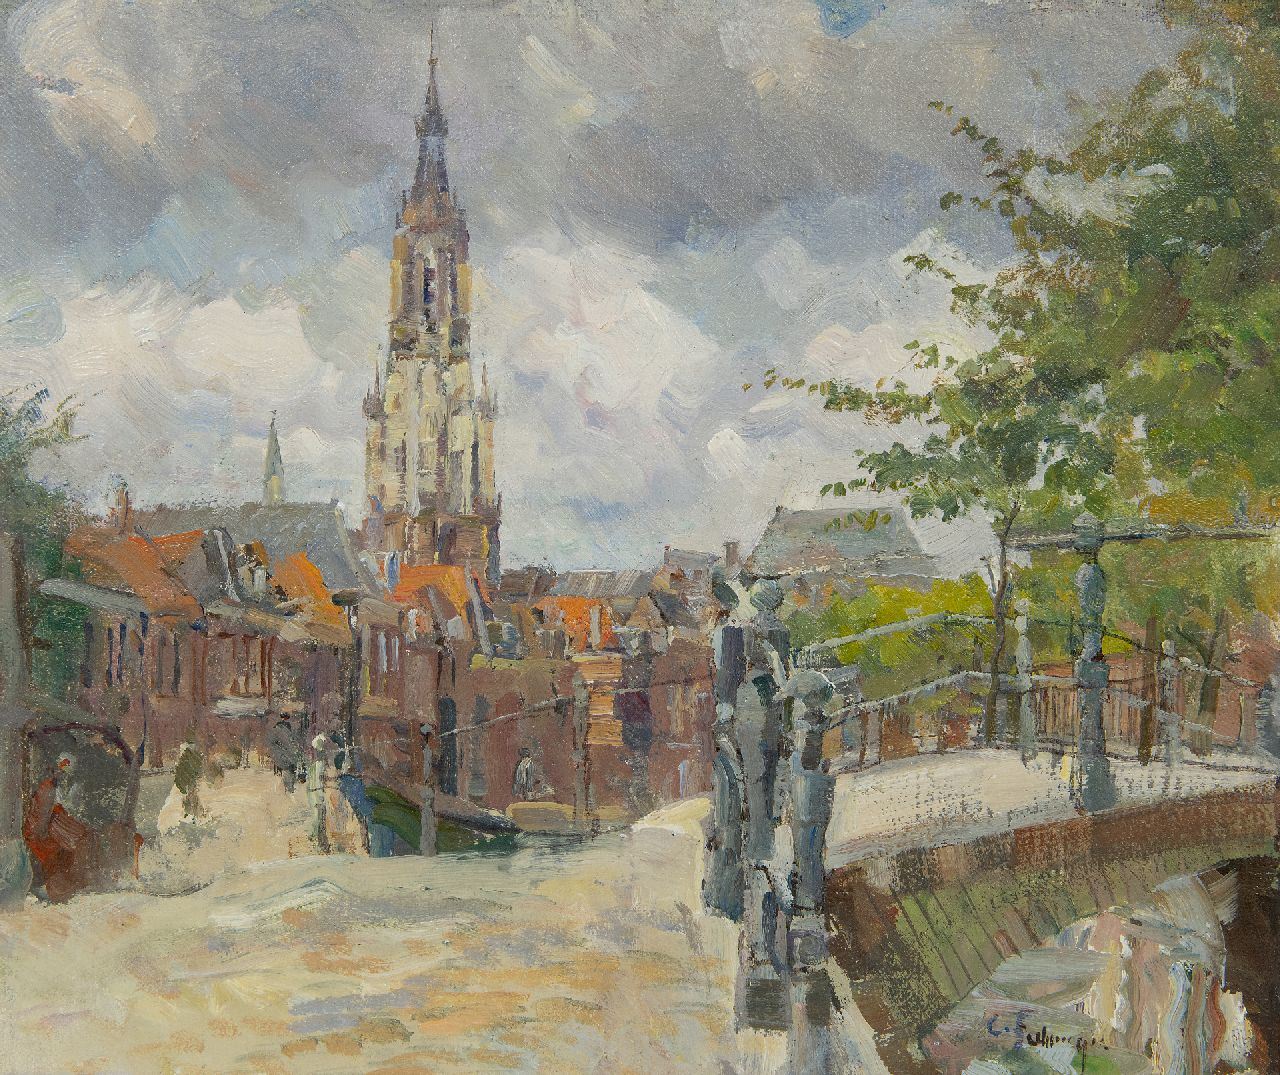 Fahringer C.  | Carl Fahringer | Paintings offered for sale | View on the Nieuwe Kerk, Delft, oil on canvas laid down on board 29.9 x 34.9 cm, signed l.r. and without frame